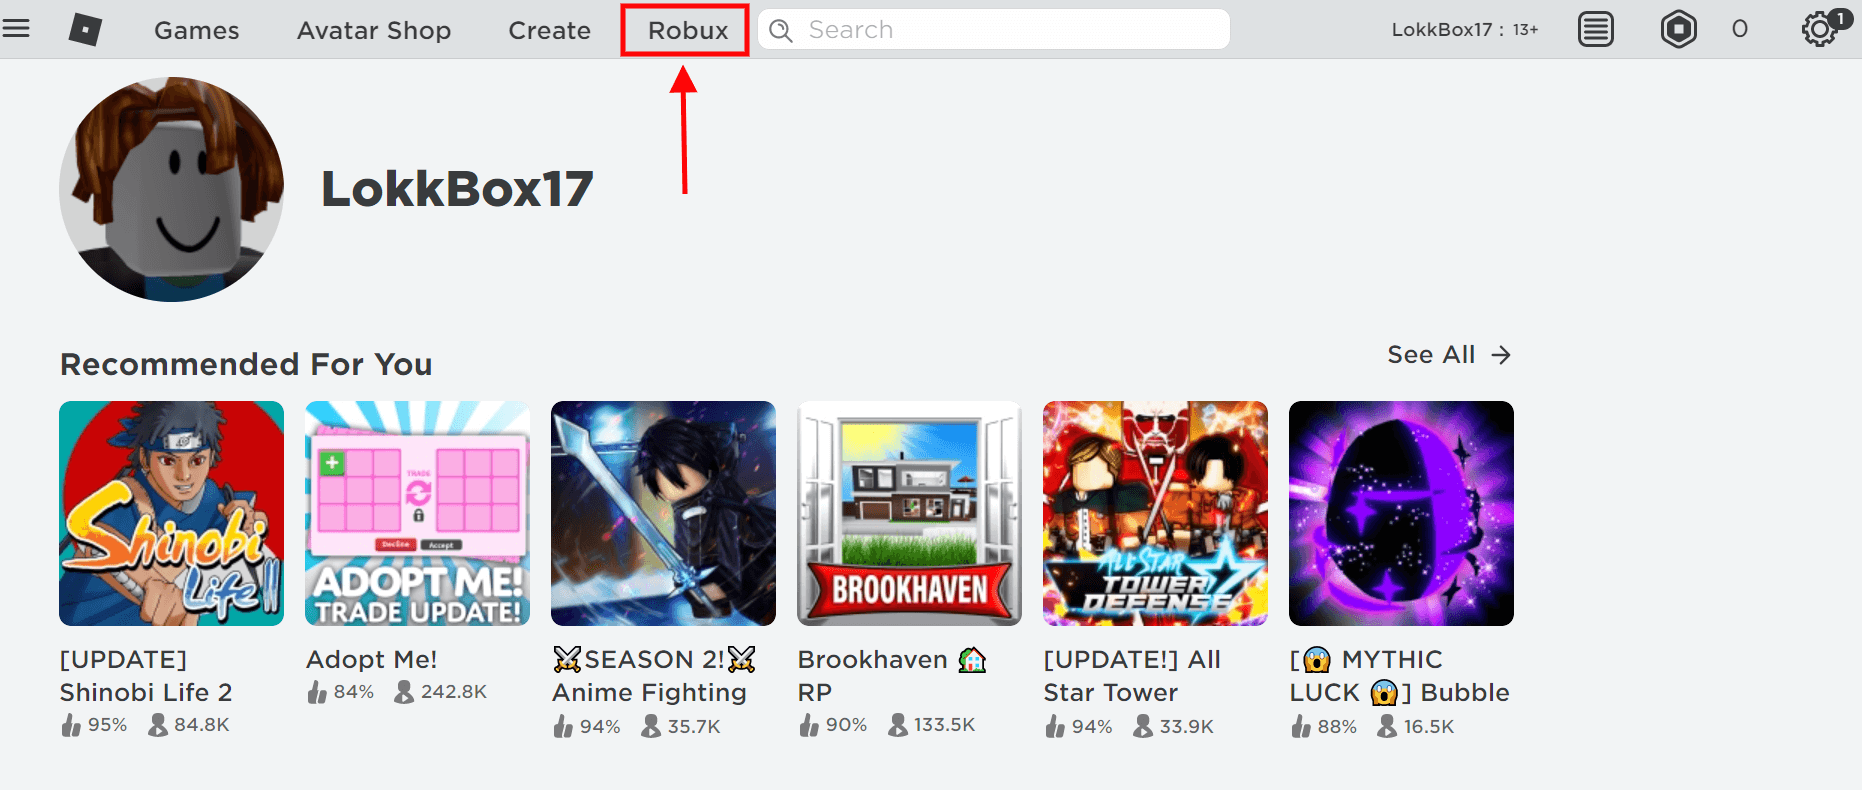 How To Buy Robux Using Globe Or Smart Load Wallet Codes Blog - how much is 80 robux in philippines